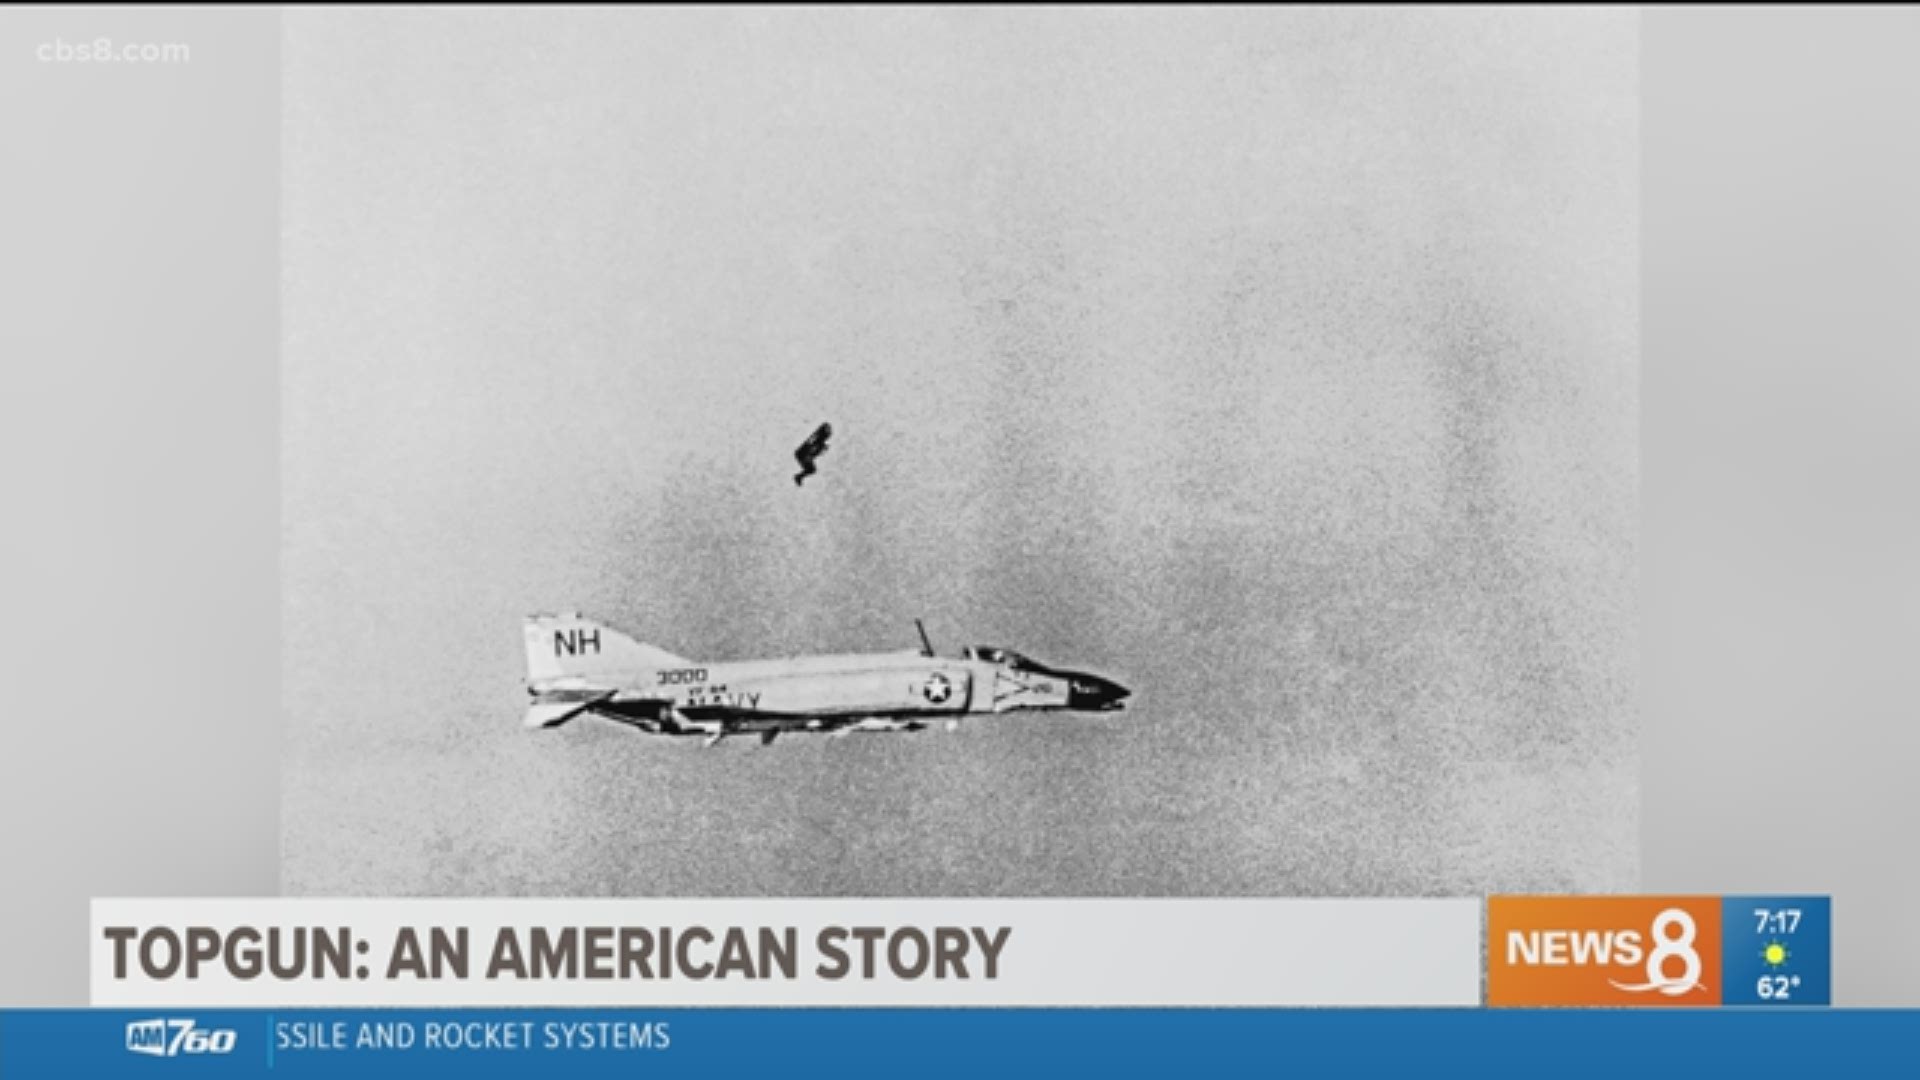 Navy veteran Captain Dan Pedersen was tasked with creating an elite flight school 50 years ago and is now sharing his story in a new book called "Top Gun: An American Story."